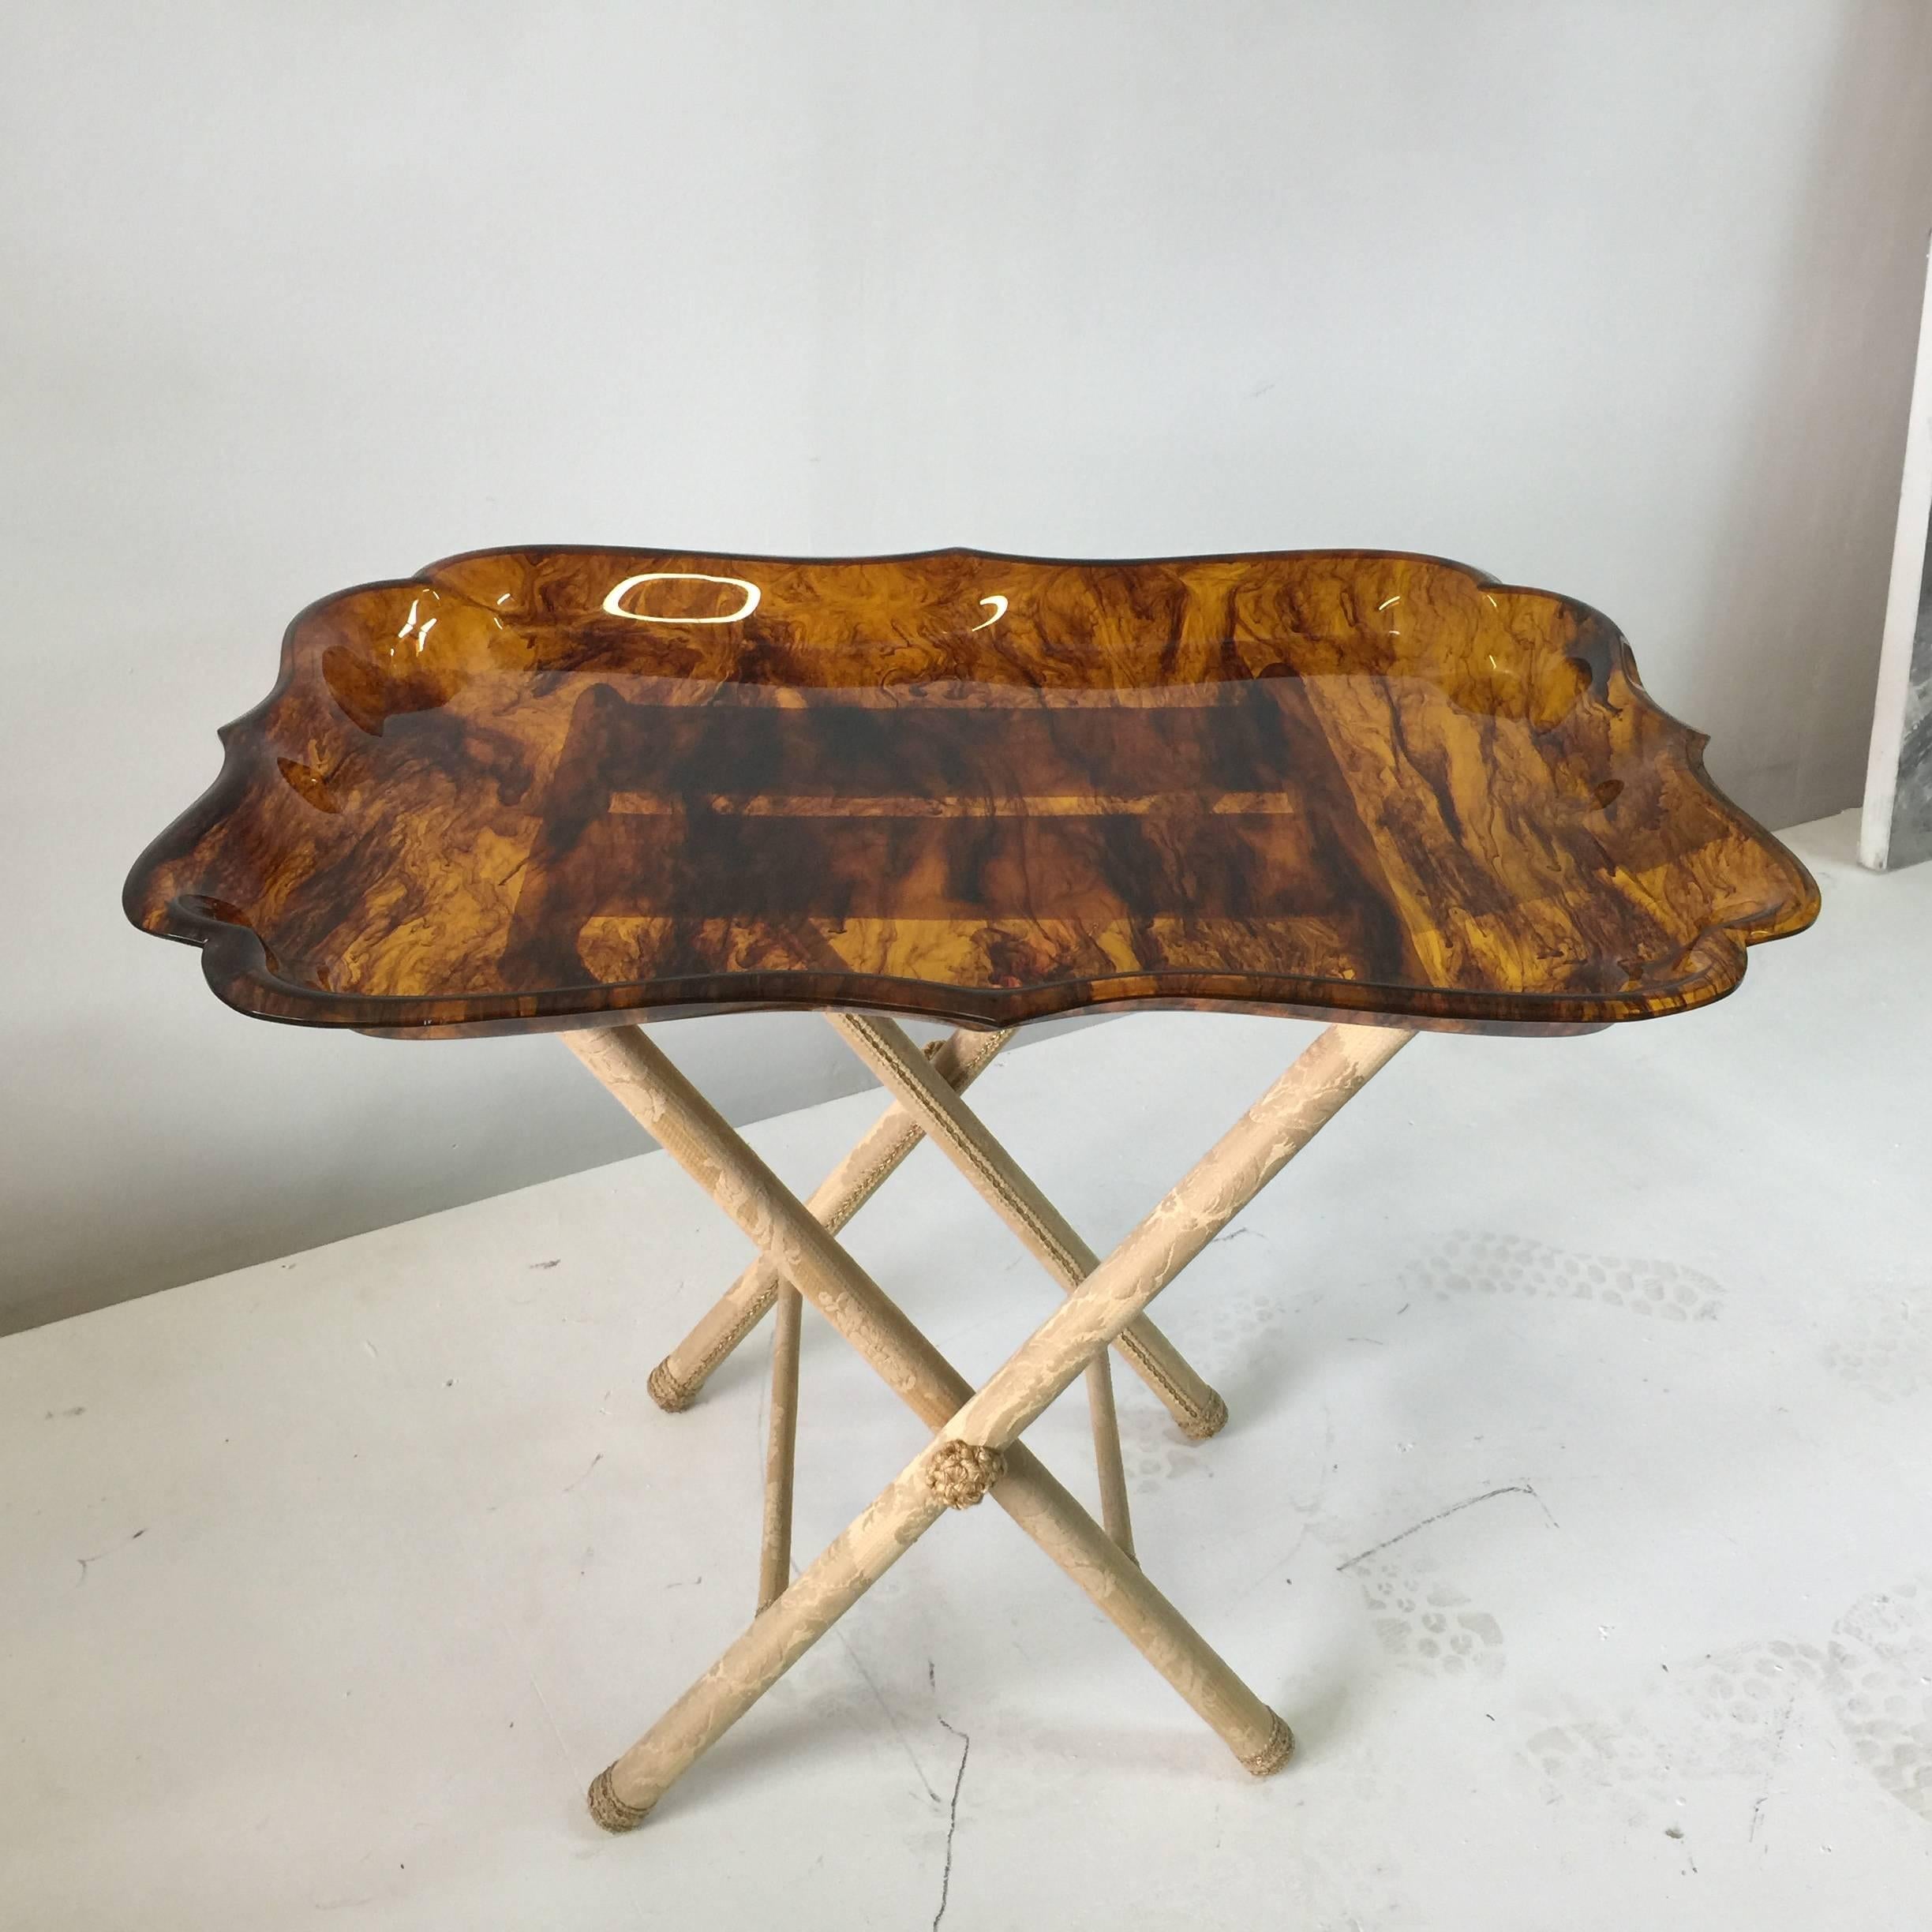 This very elegant yet whimsical tea service or side table is comprised of: An intricately designed scalloped acrylic tray with transparent tortoise shell finish, a completely covered folding stand in vintage Fortuny silk. Very stylish Venetian set!